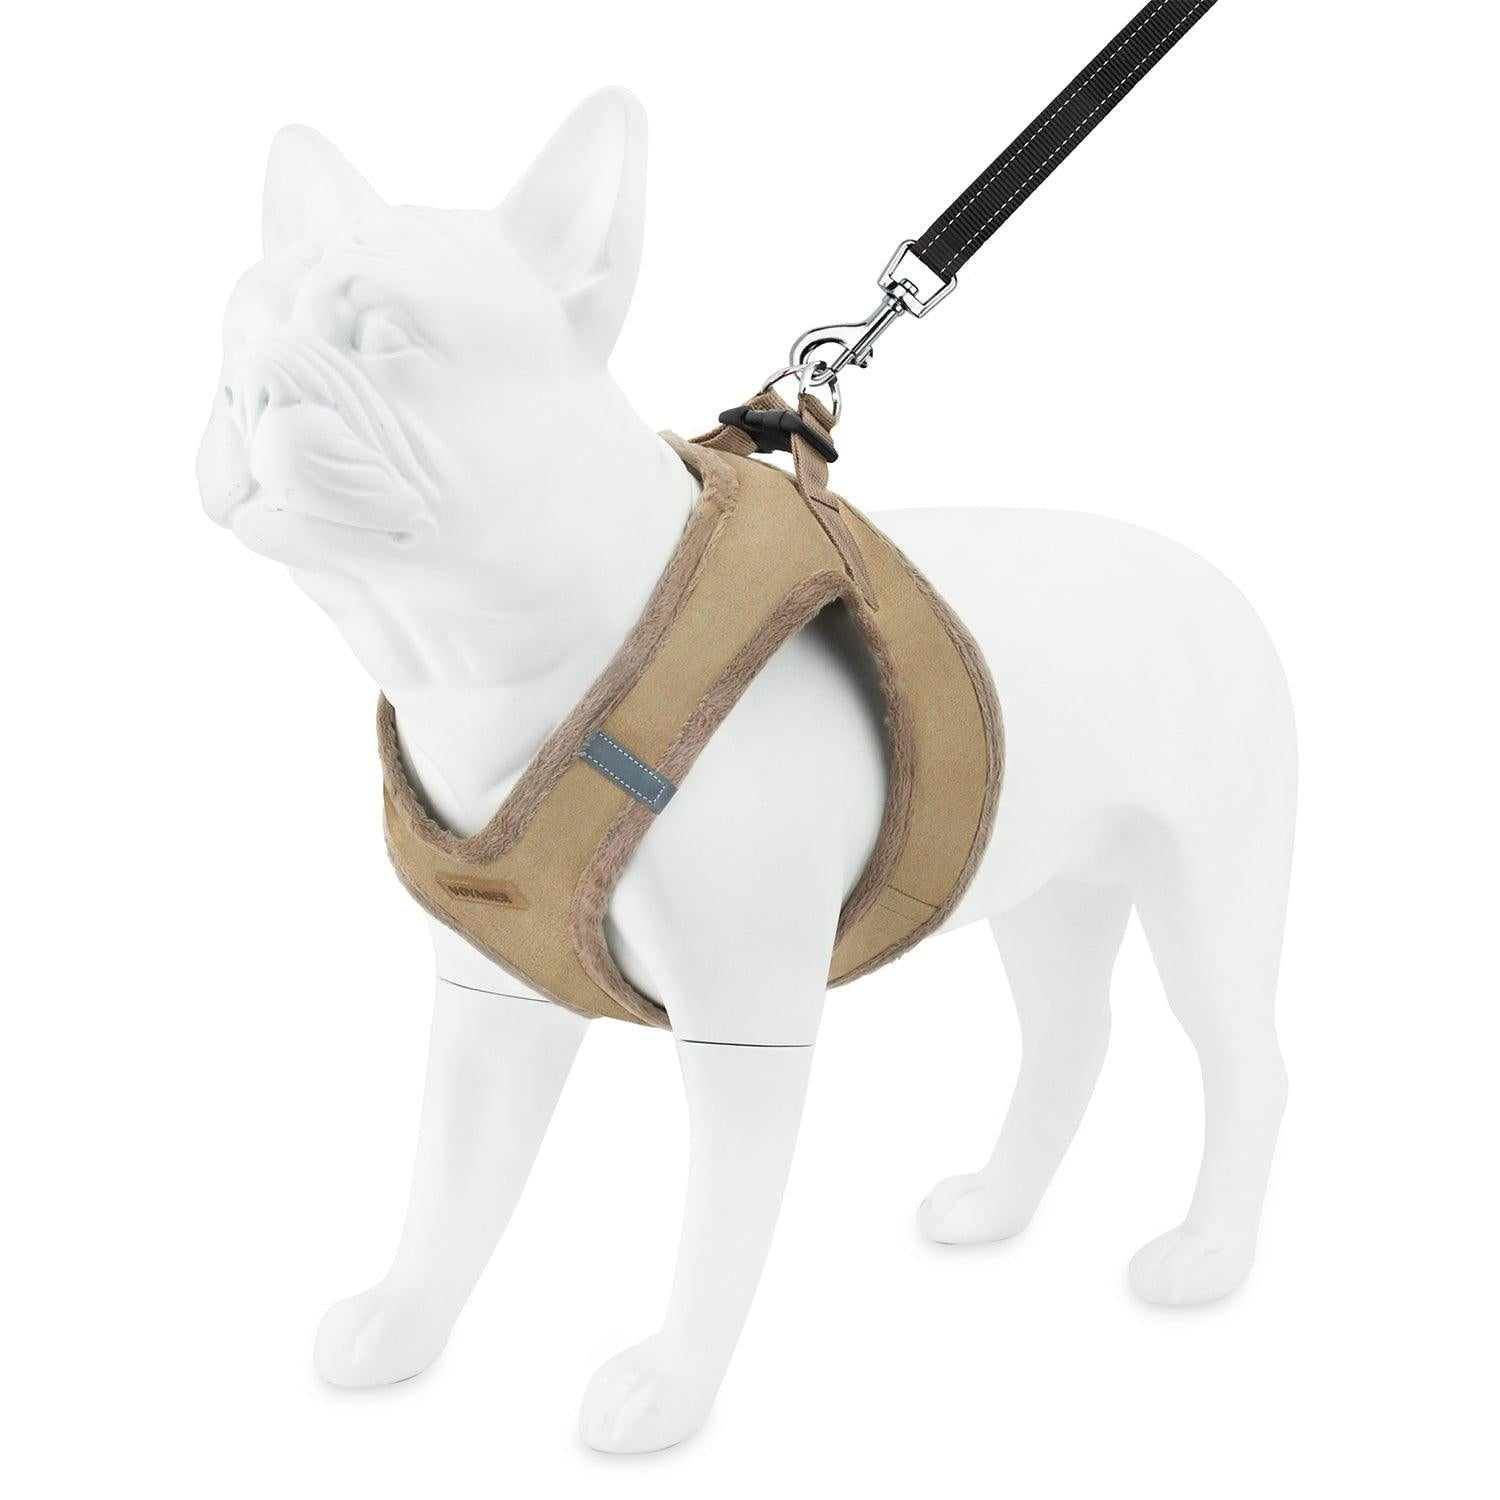 Step-In Plush Harness & Leash Set - VOYAGER Dog Harnesses